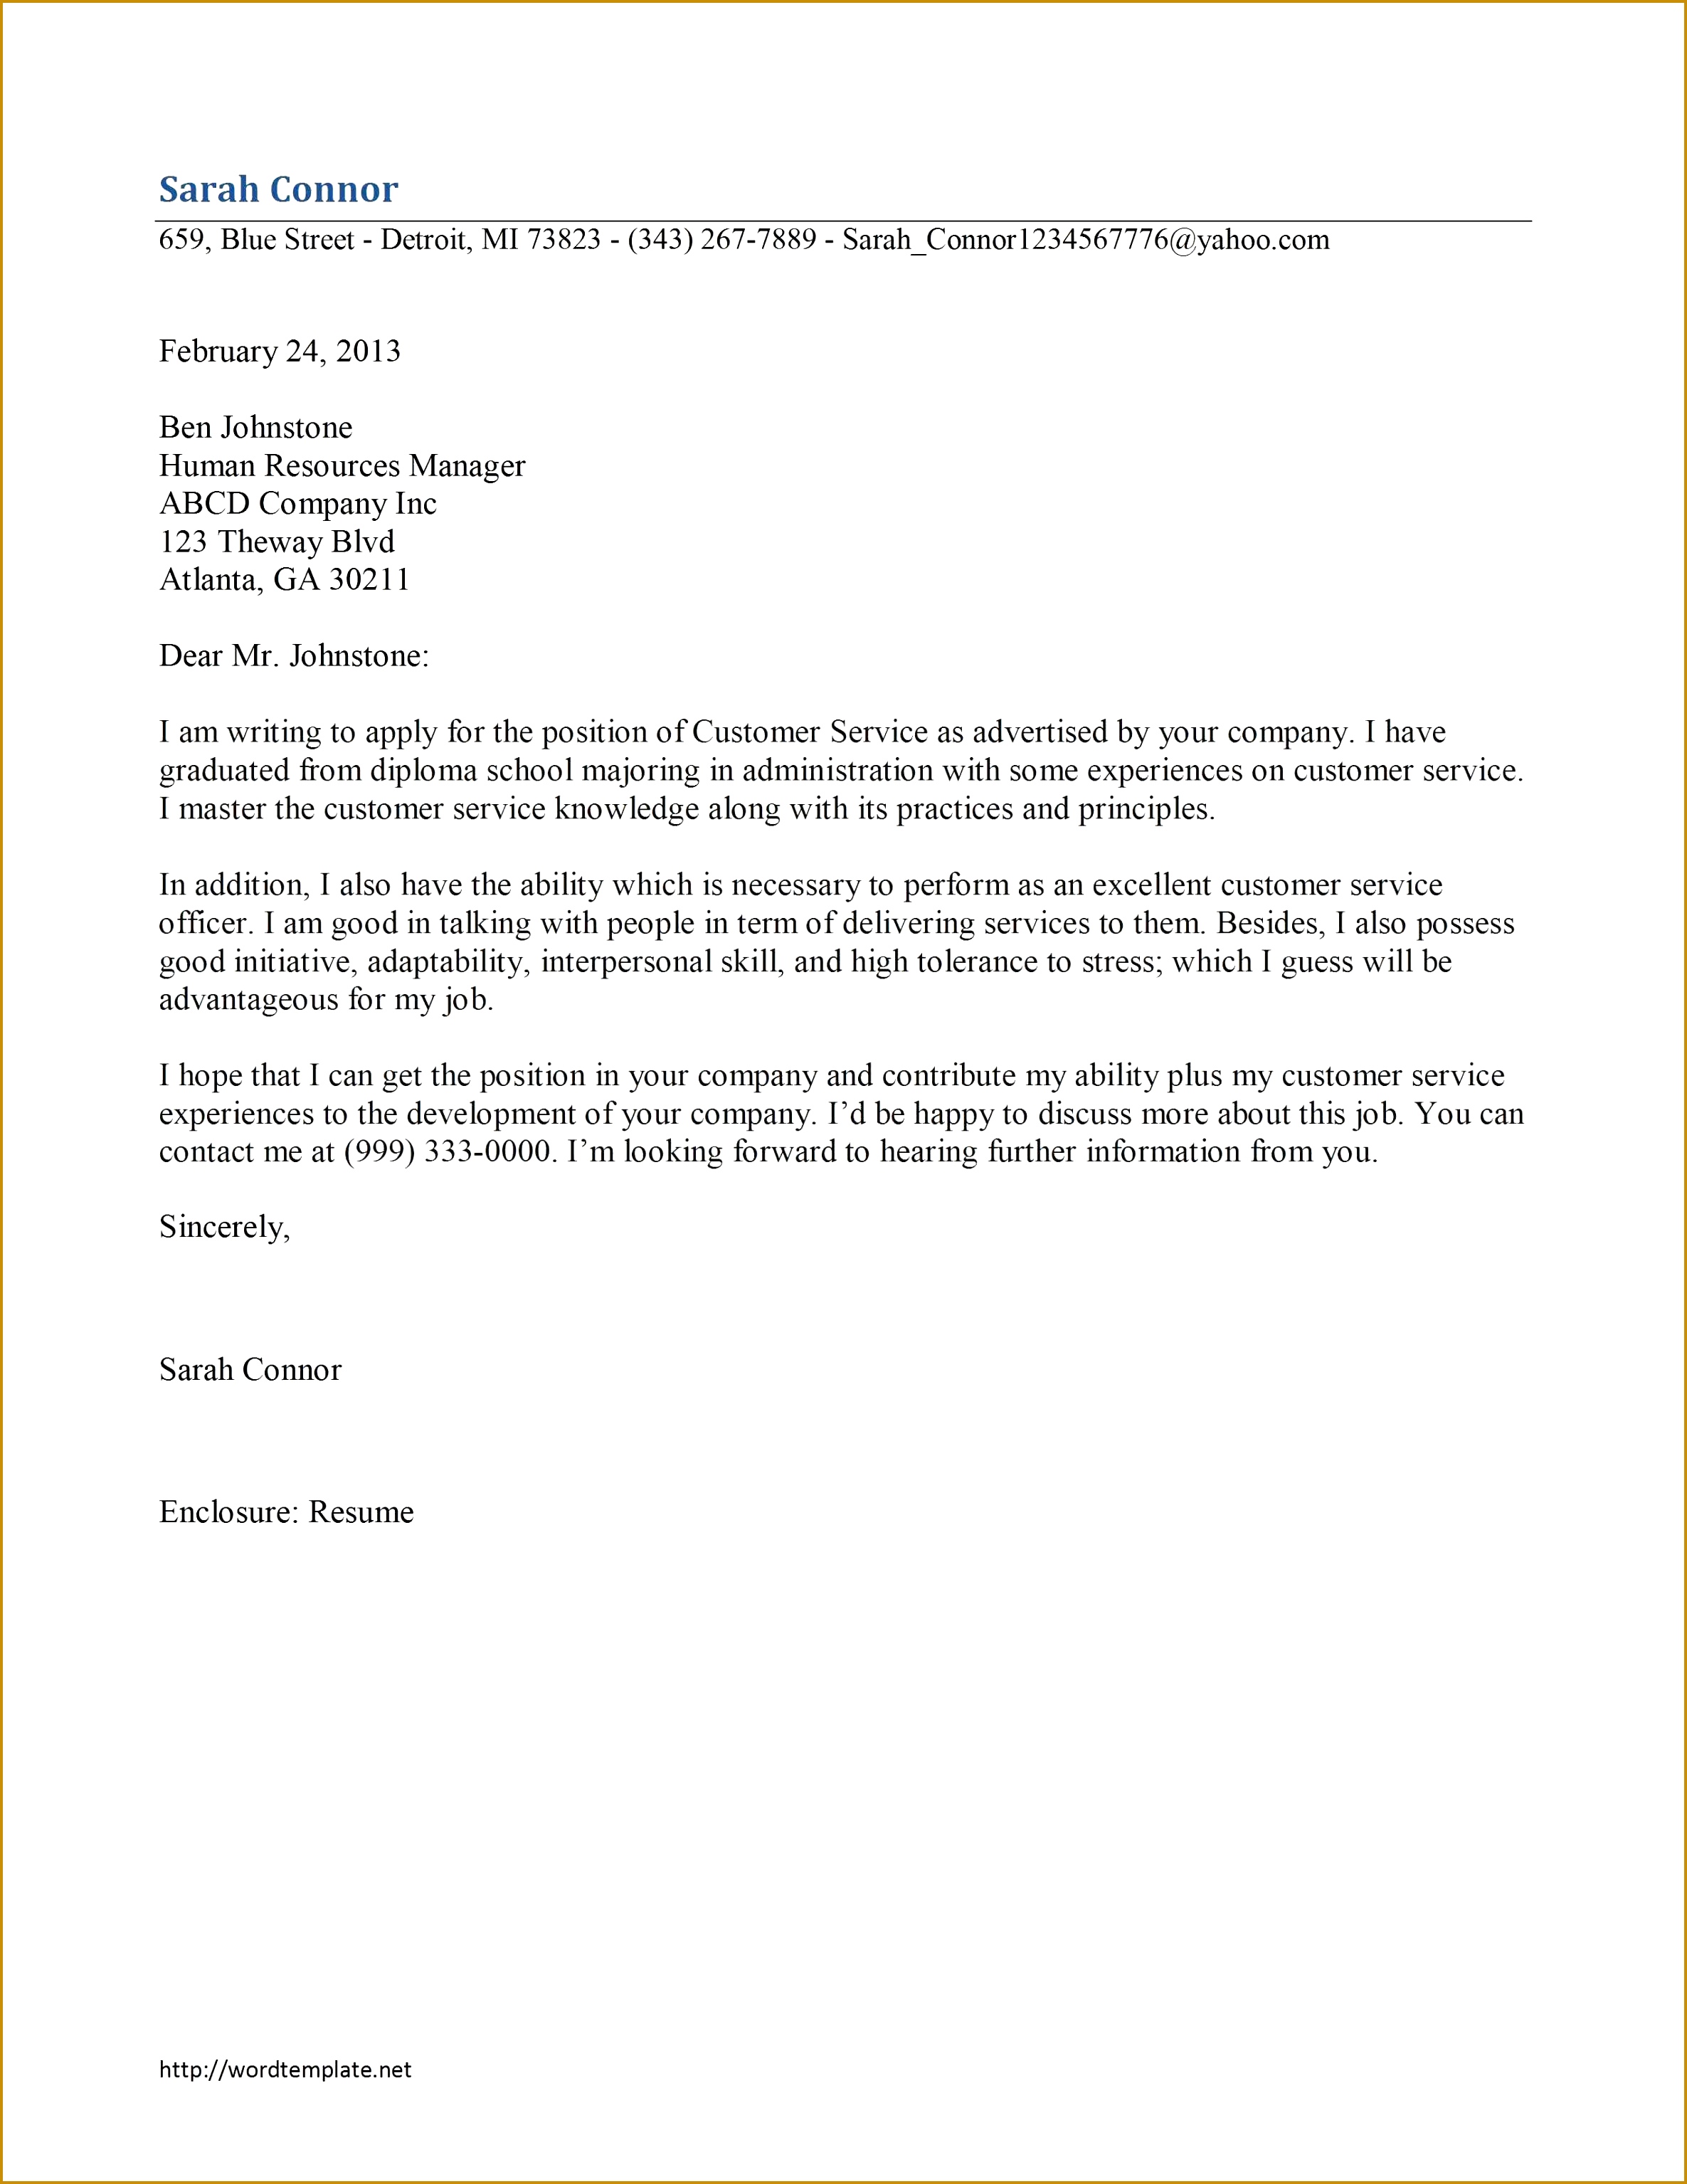 Beautiful ormat Cover Letter Best Cover Letter Examples for Internship Sample Resume Cover Letters 17 23713069